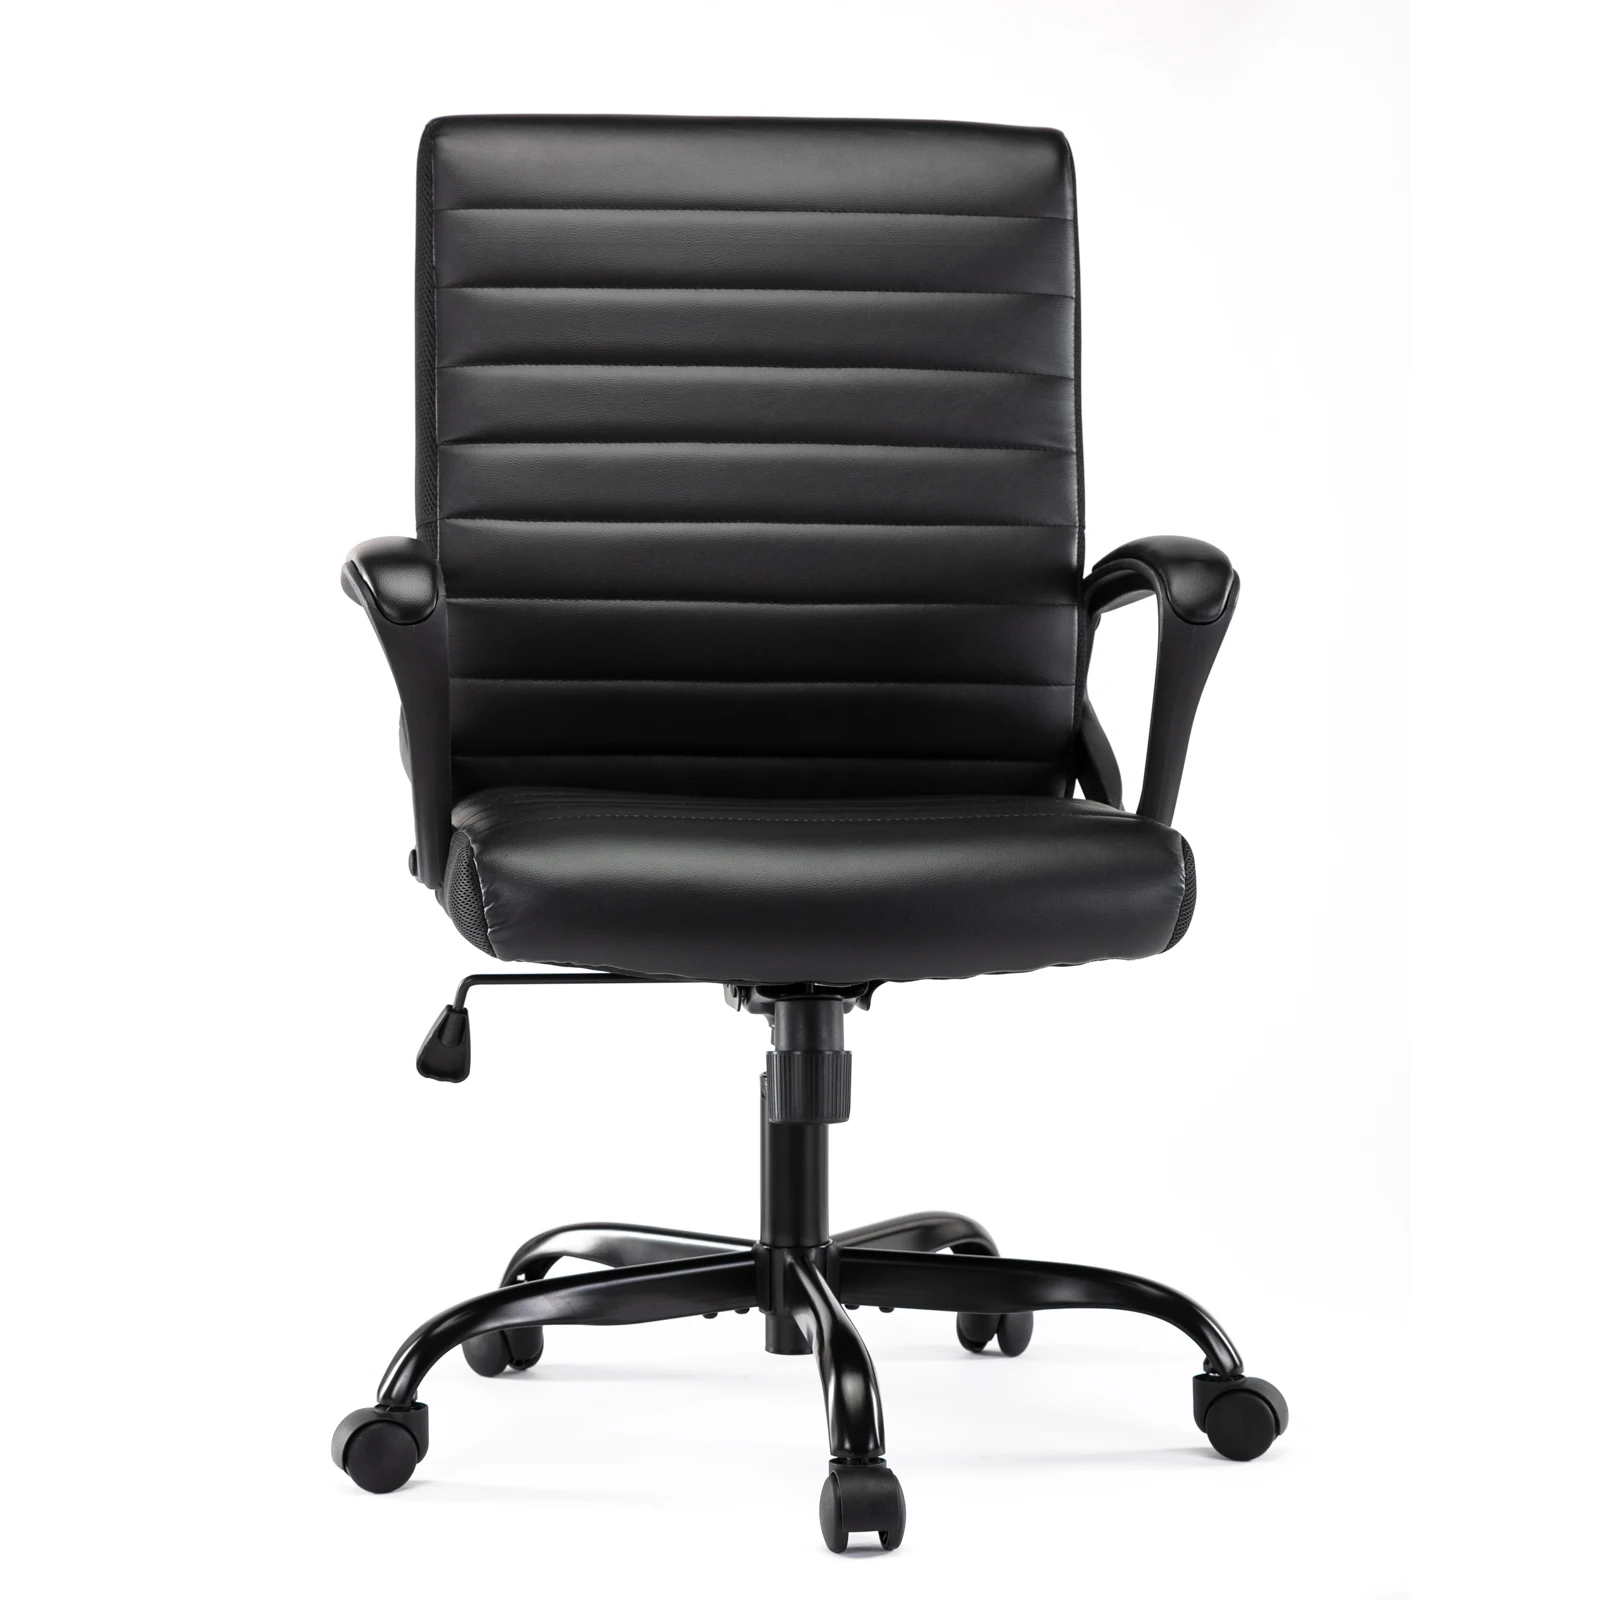 

USA STOCK Free Shipping Ergonomic Executive Bonded Leather Computer Chair,Office Swivel Chair, Desk Chair